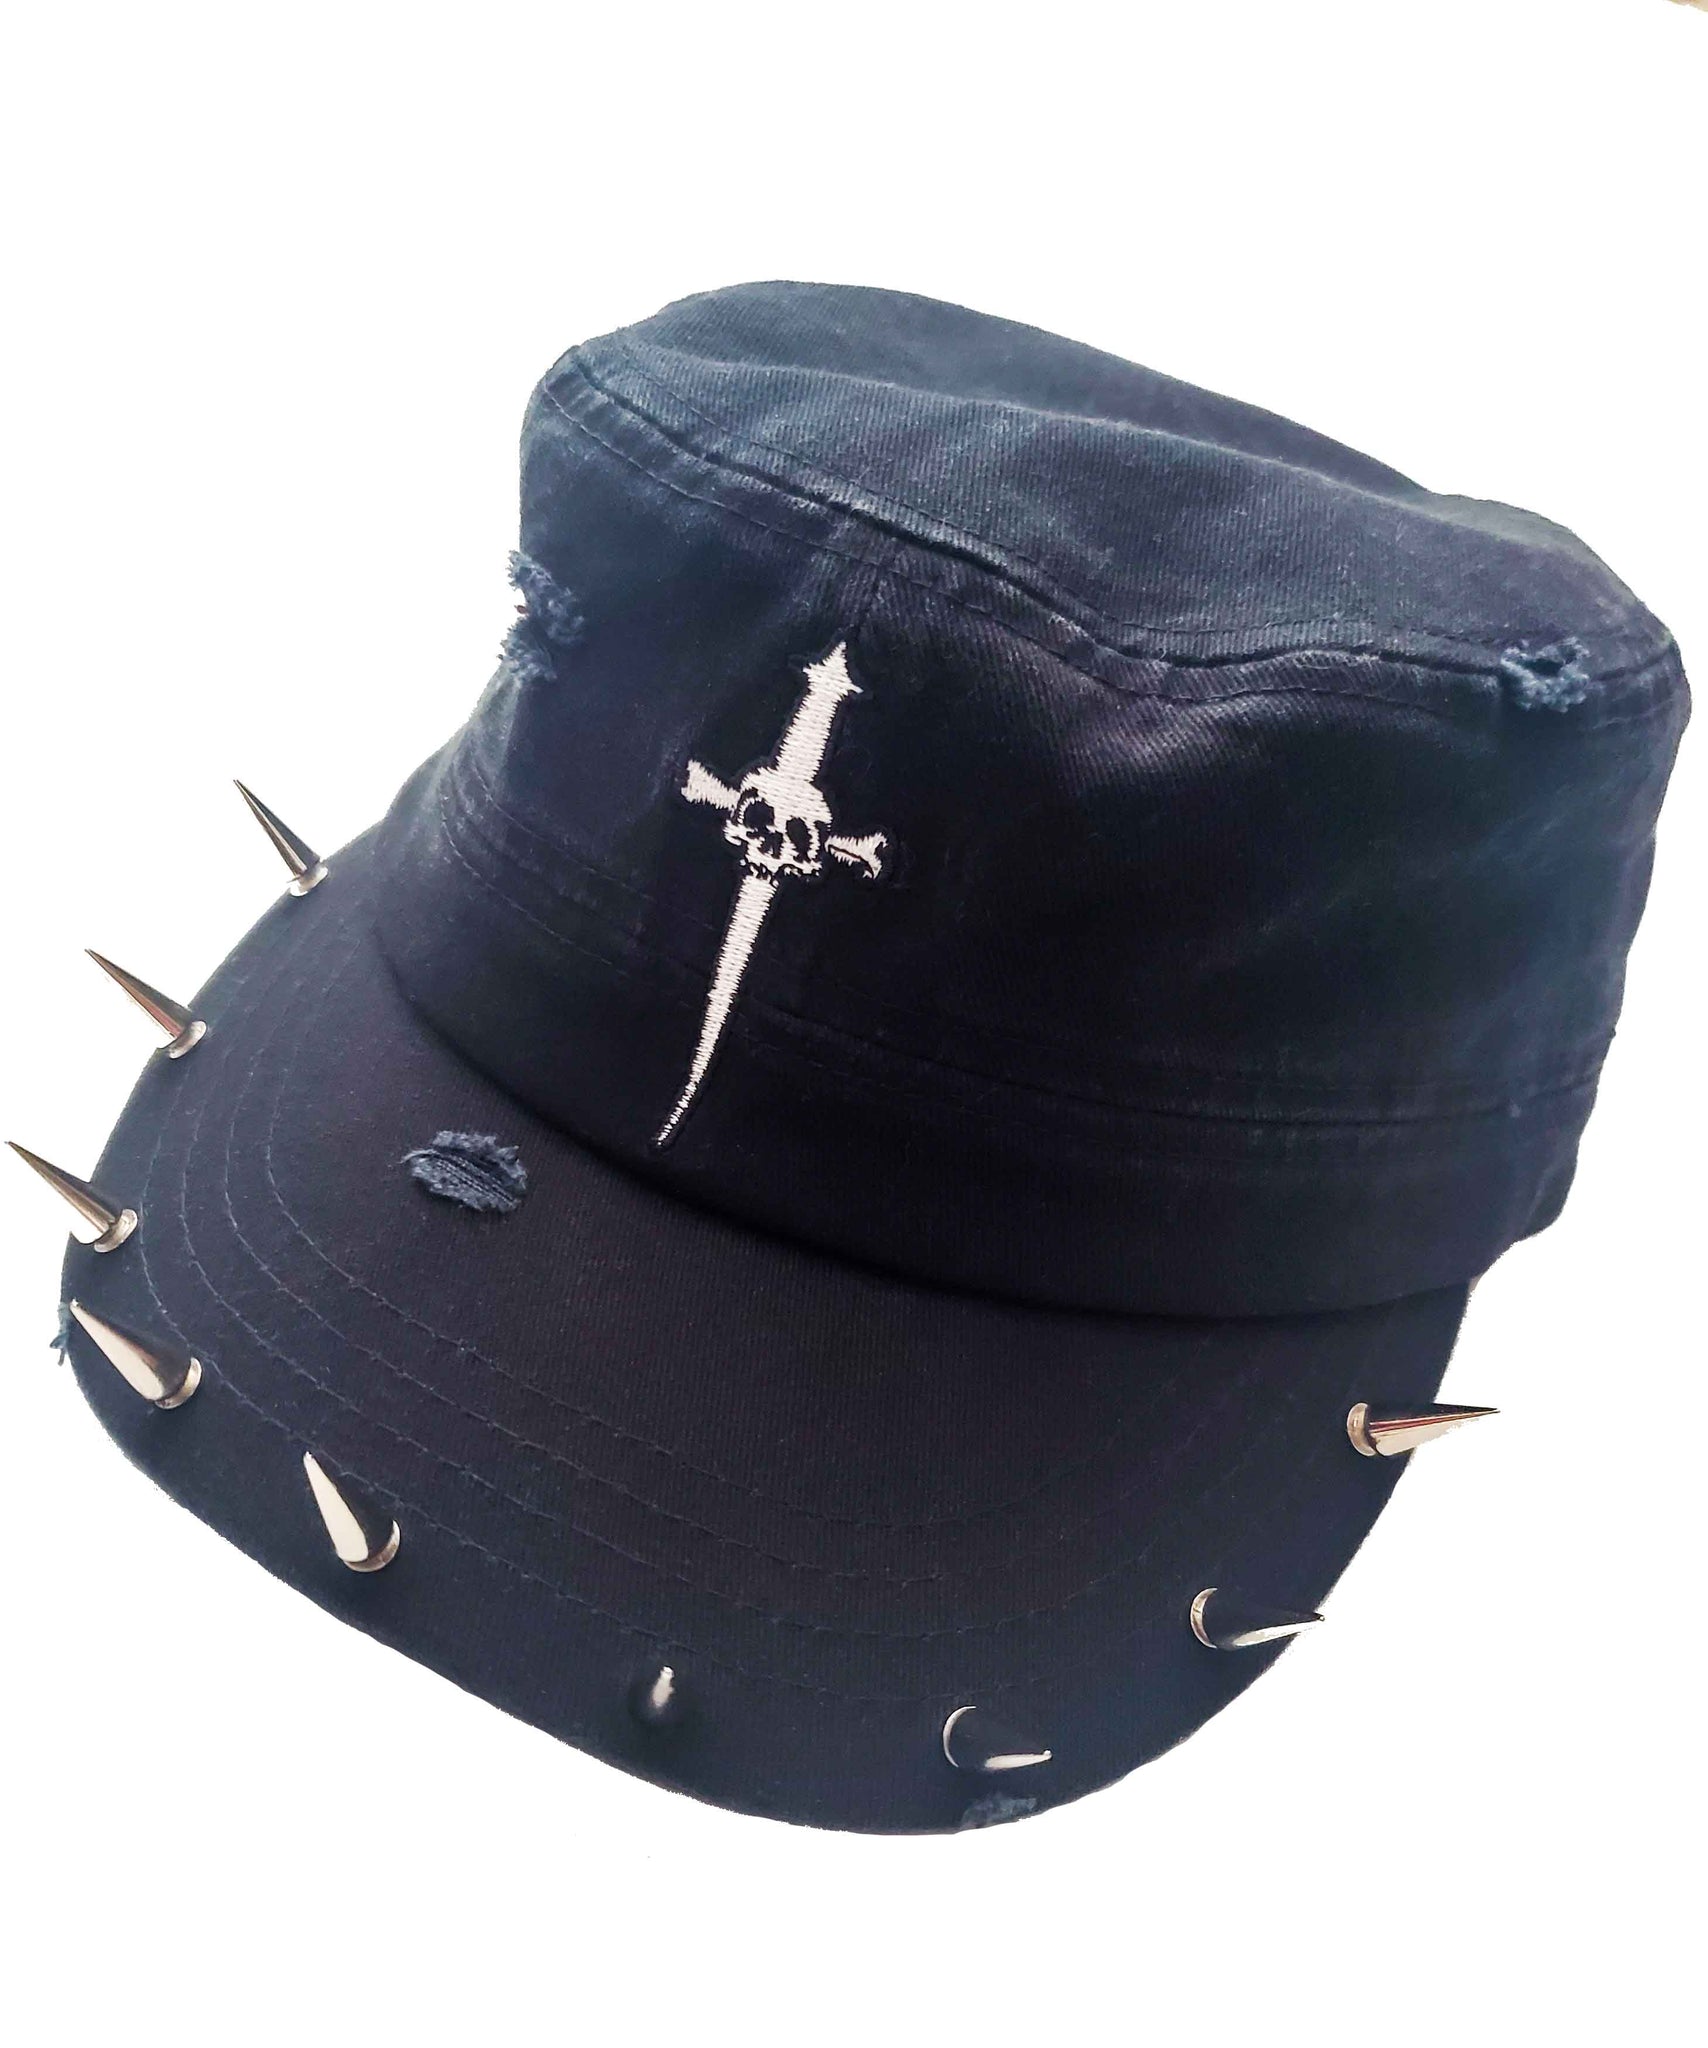 Spiked Distressed "Rivethead" Hat